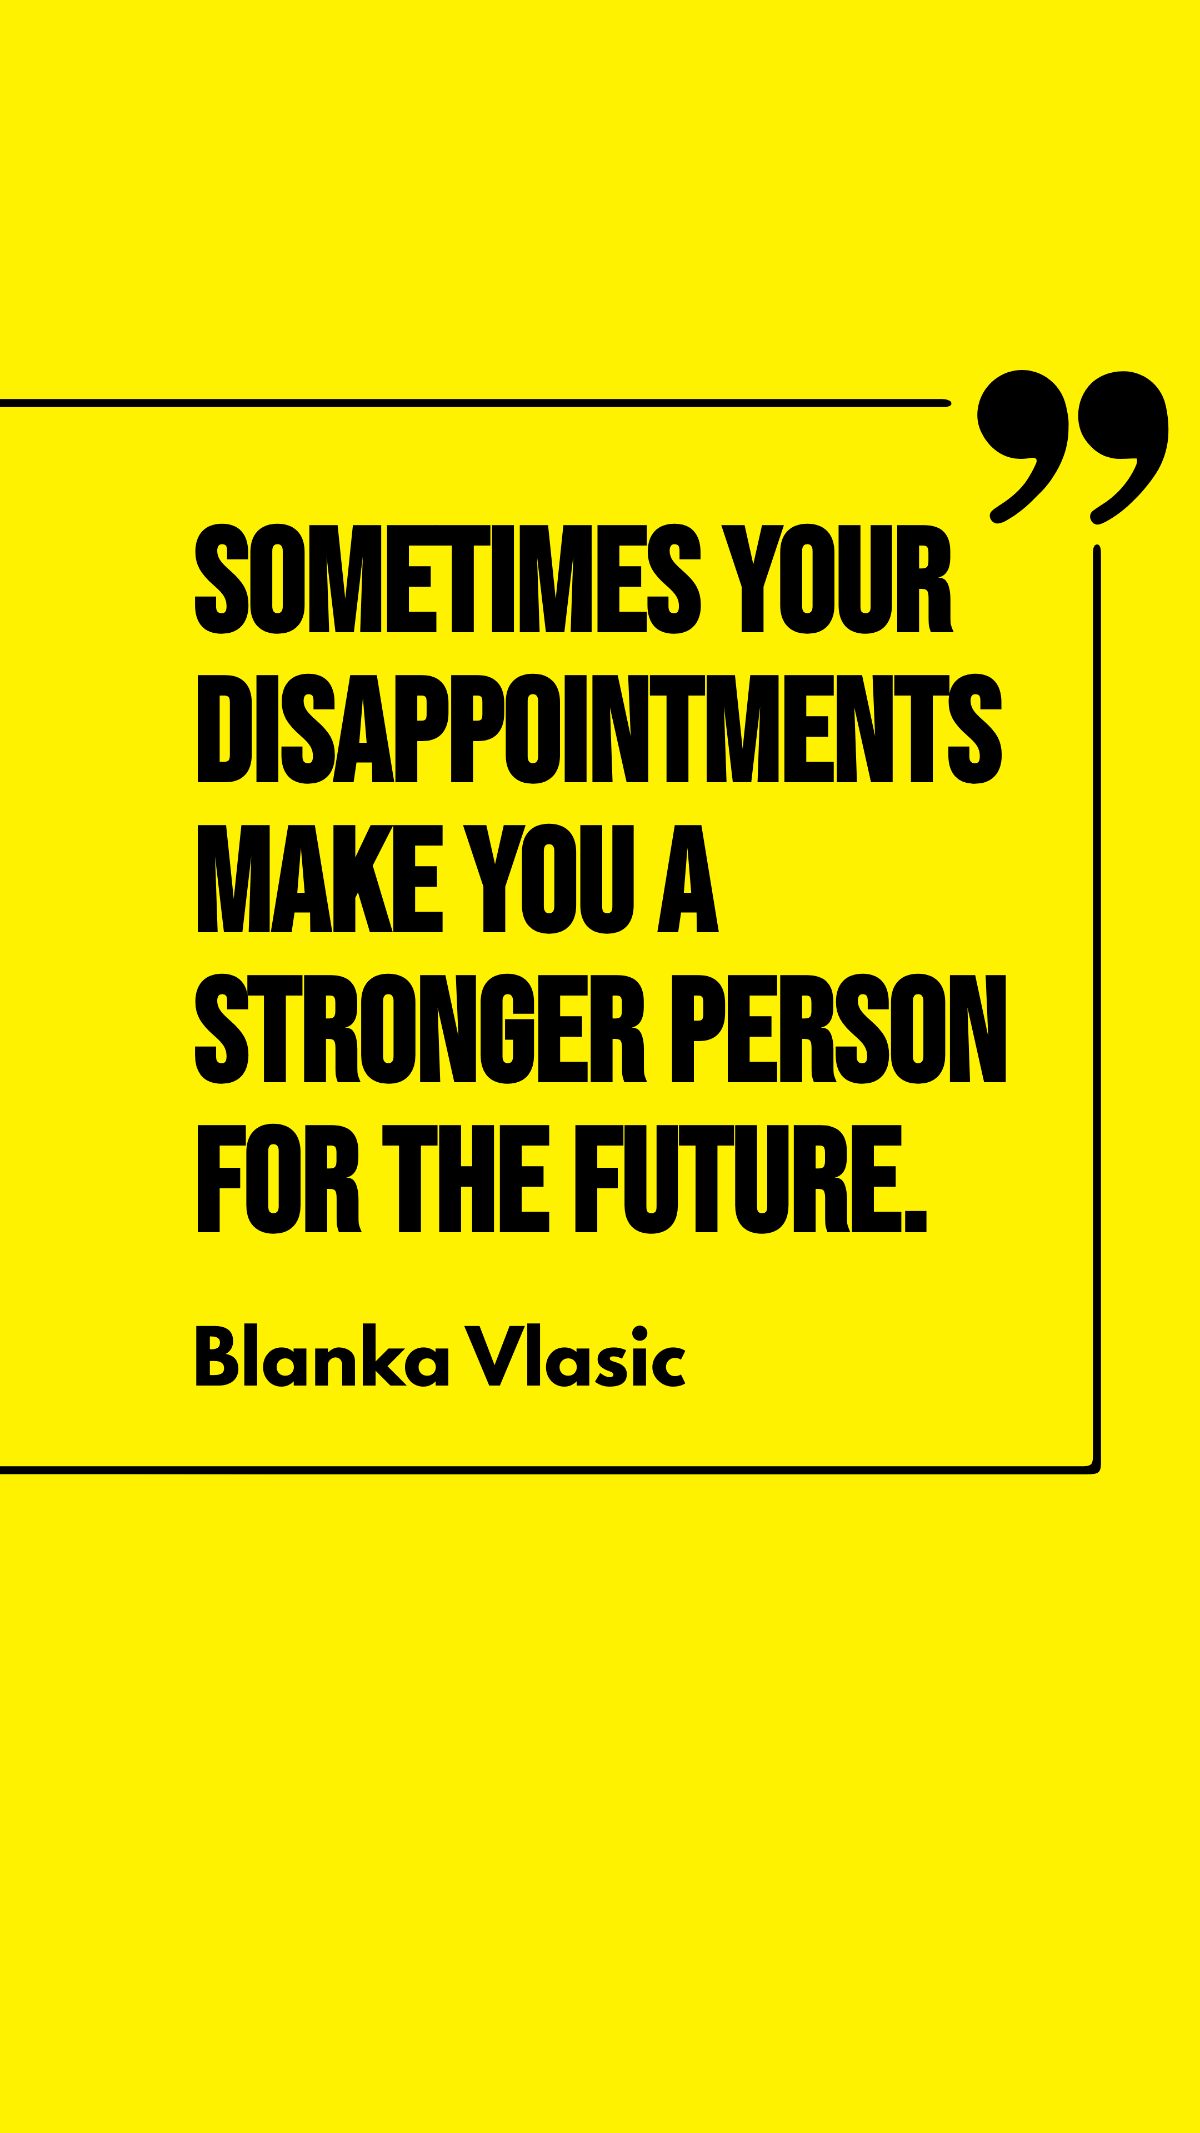 Blanka Vlasic - Sometimes your disappointments make you a stronger person for the future. Template